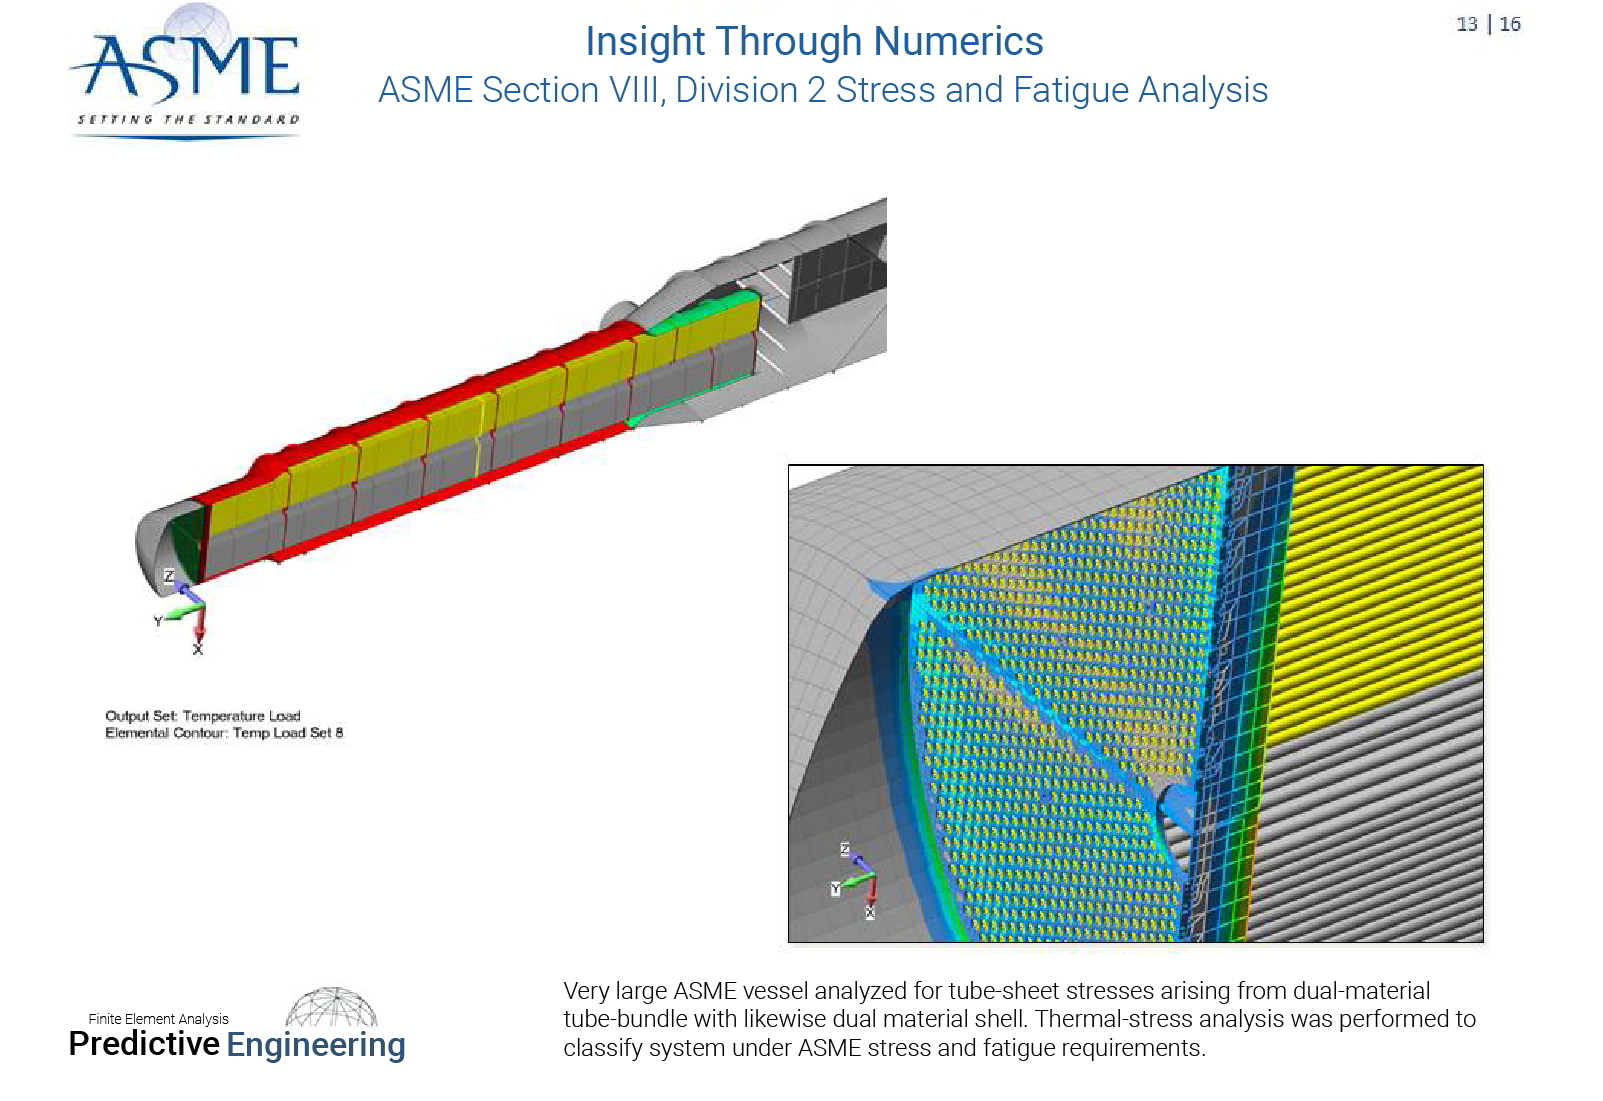 Thermal-stress analysis was performed to classify system under ASME stress and fatigue requirements - Predictive Engineering ASME BPVC Pressure Vessel Consulting Services